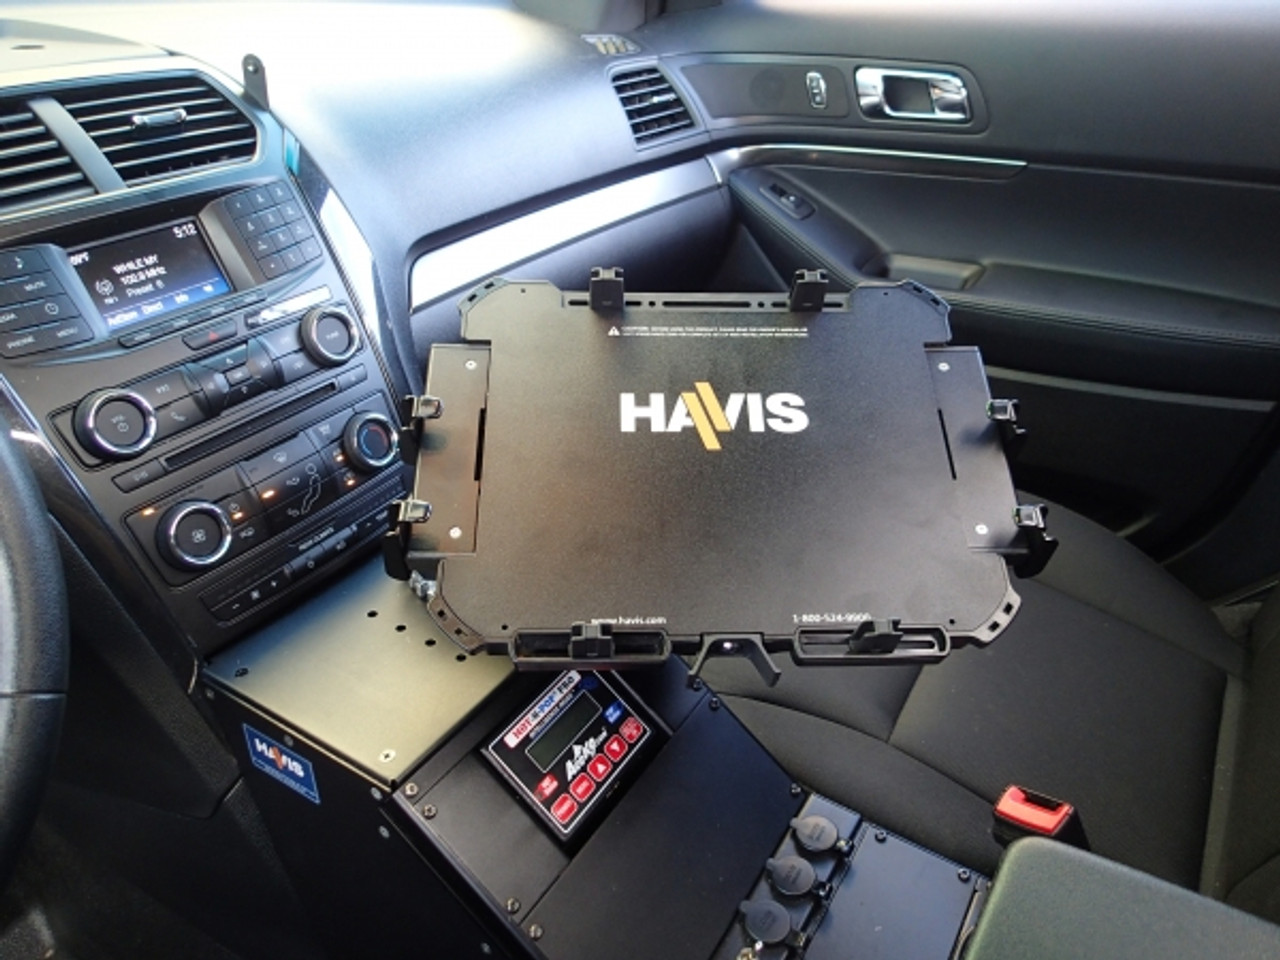 Havis UT-1004 Universal Rugged Cradle for Computing Devices Approximately 11"-14" w/ Added Width